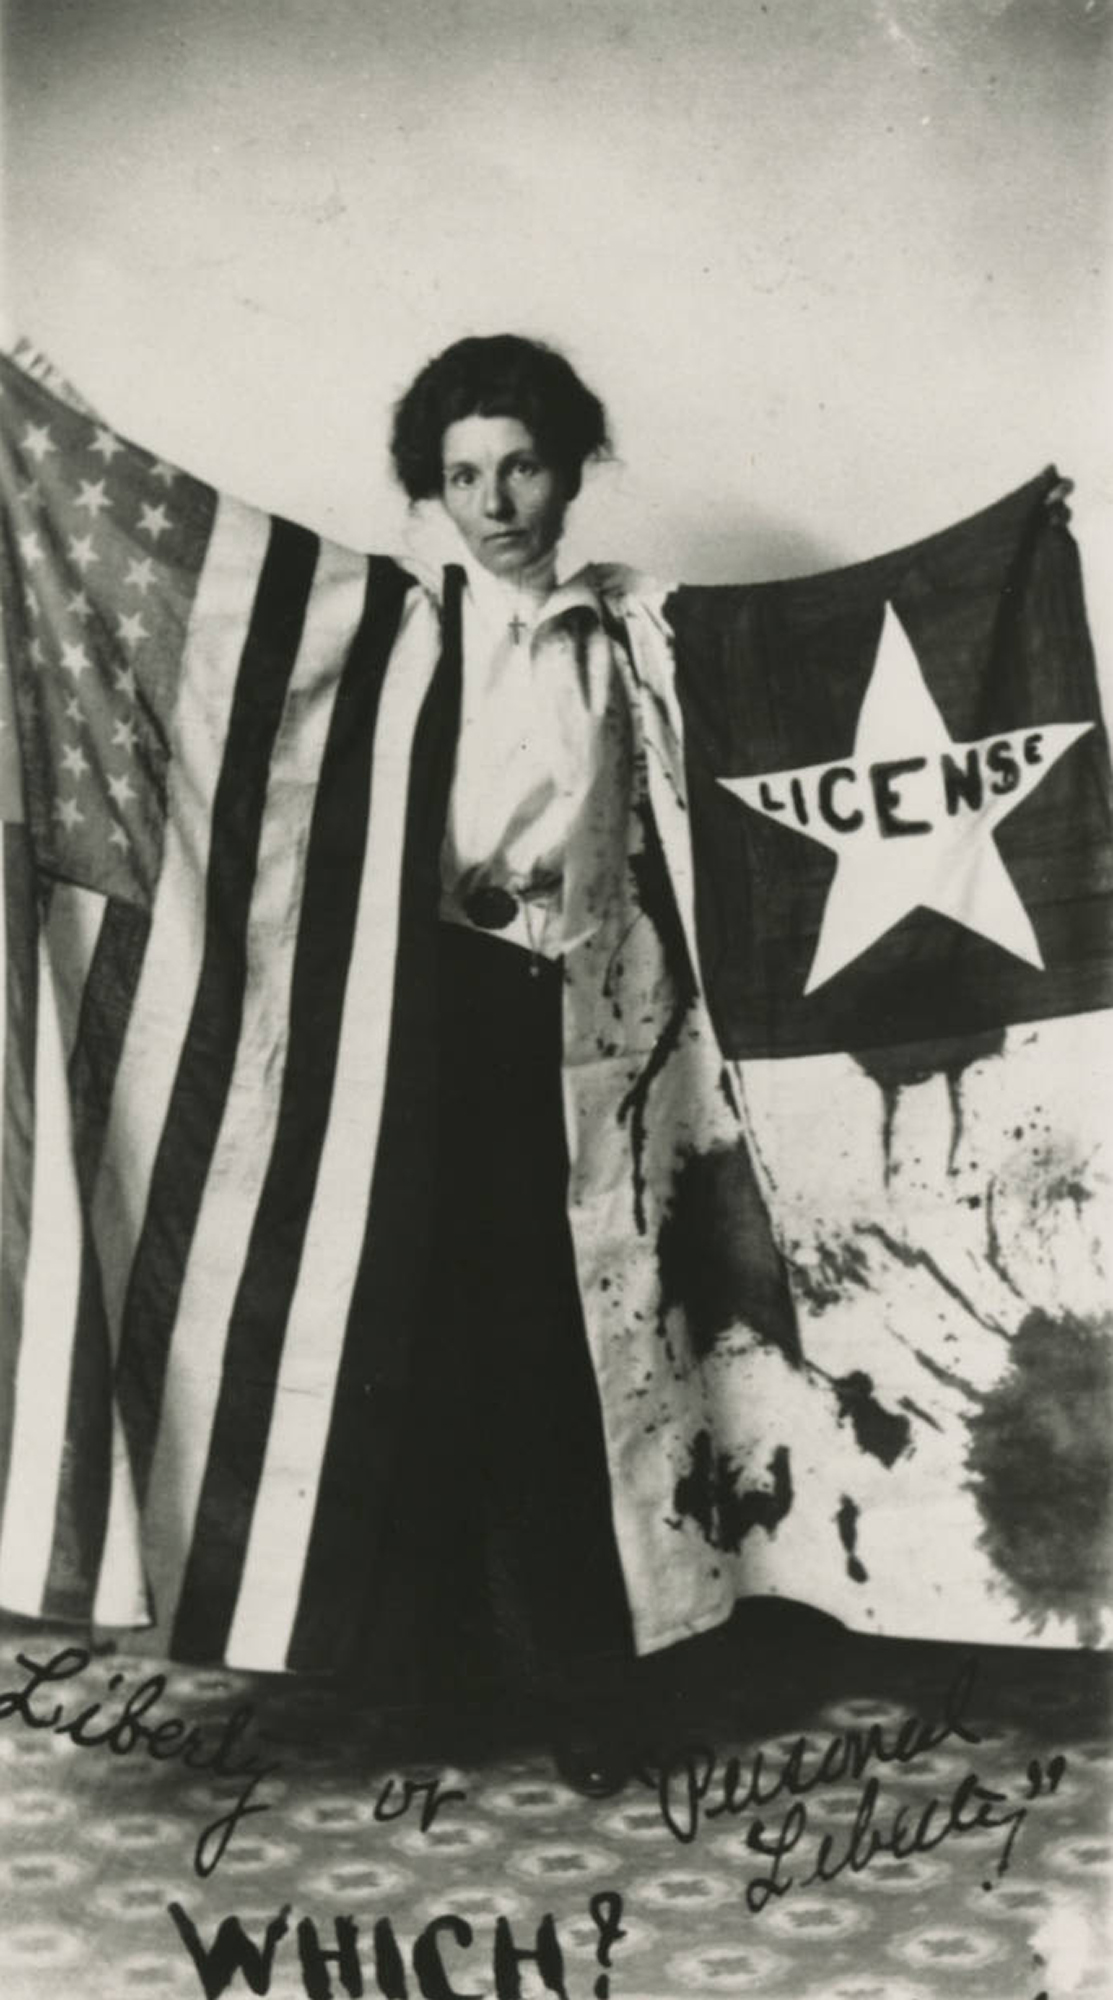 Black and white photograph of Bernie Babcock holding a suffrage banner and an American flag